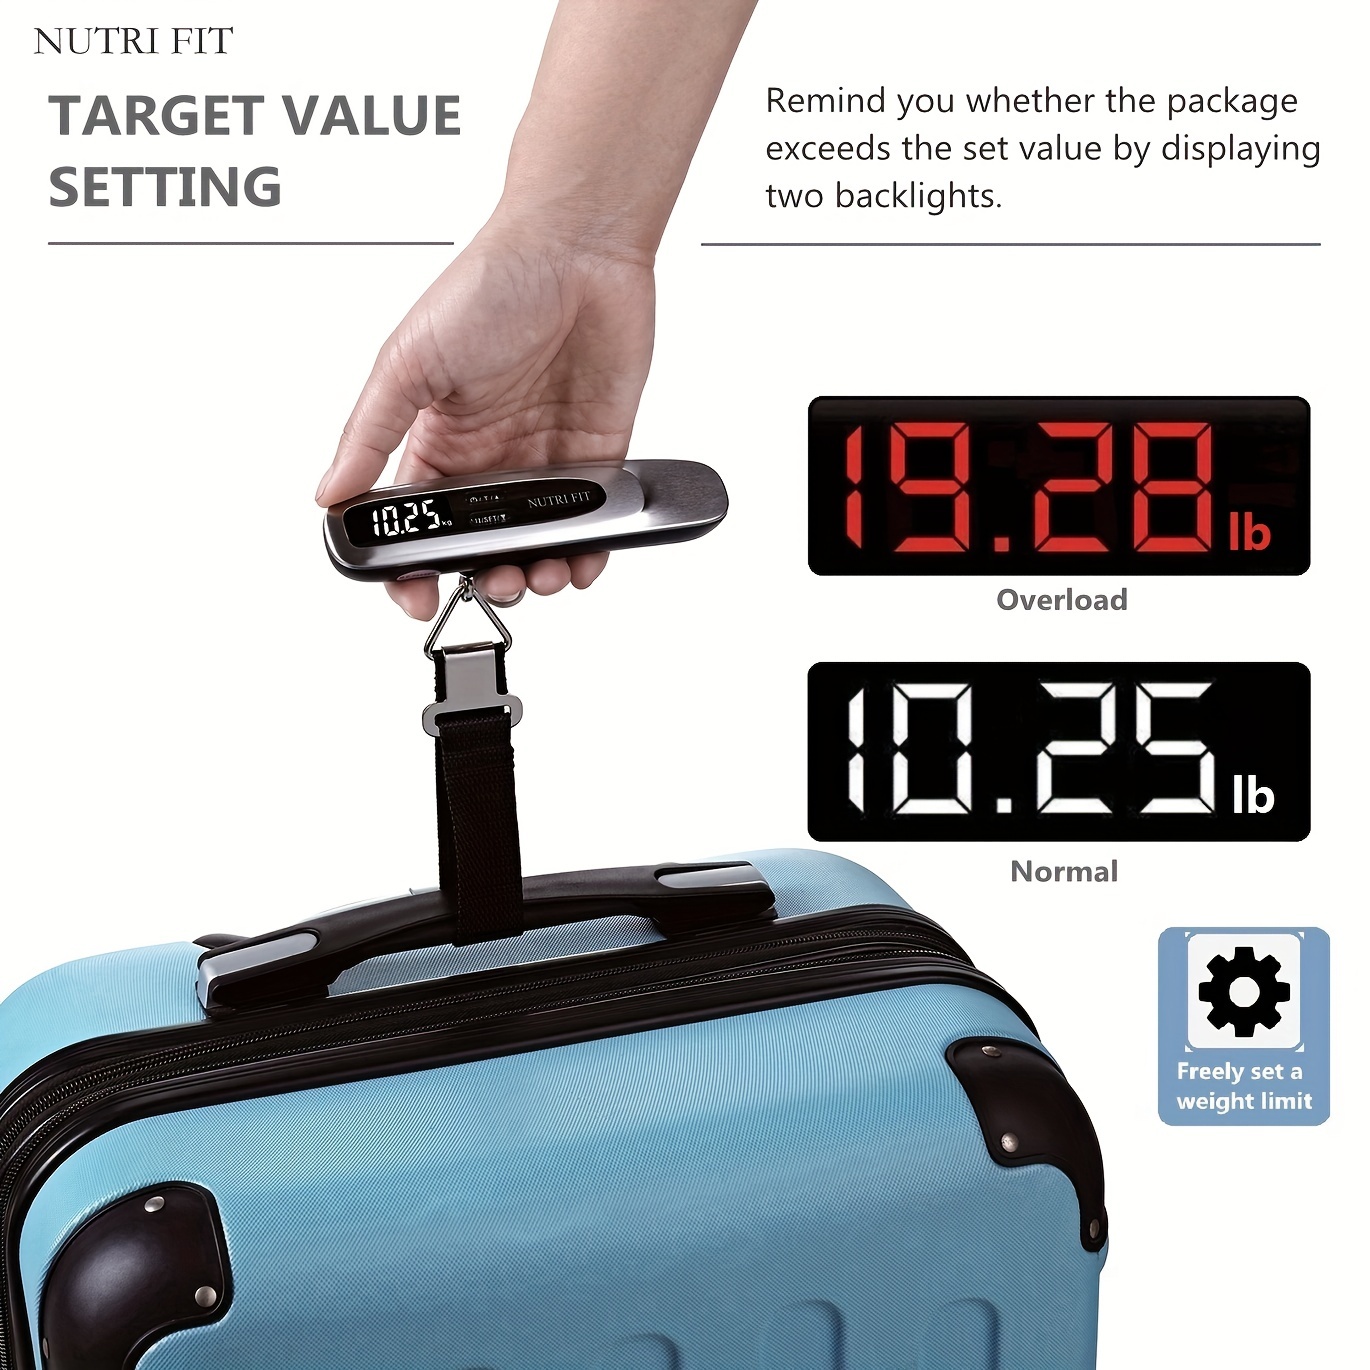  NUTRI FIT Luggage Scale Portable Handheld Baggage Scale with  Hook Heavy Duty Suitcase Scale for Travel,Overweight Alert  Functions,50kg/110lbs,Backlight LCD Display - Black